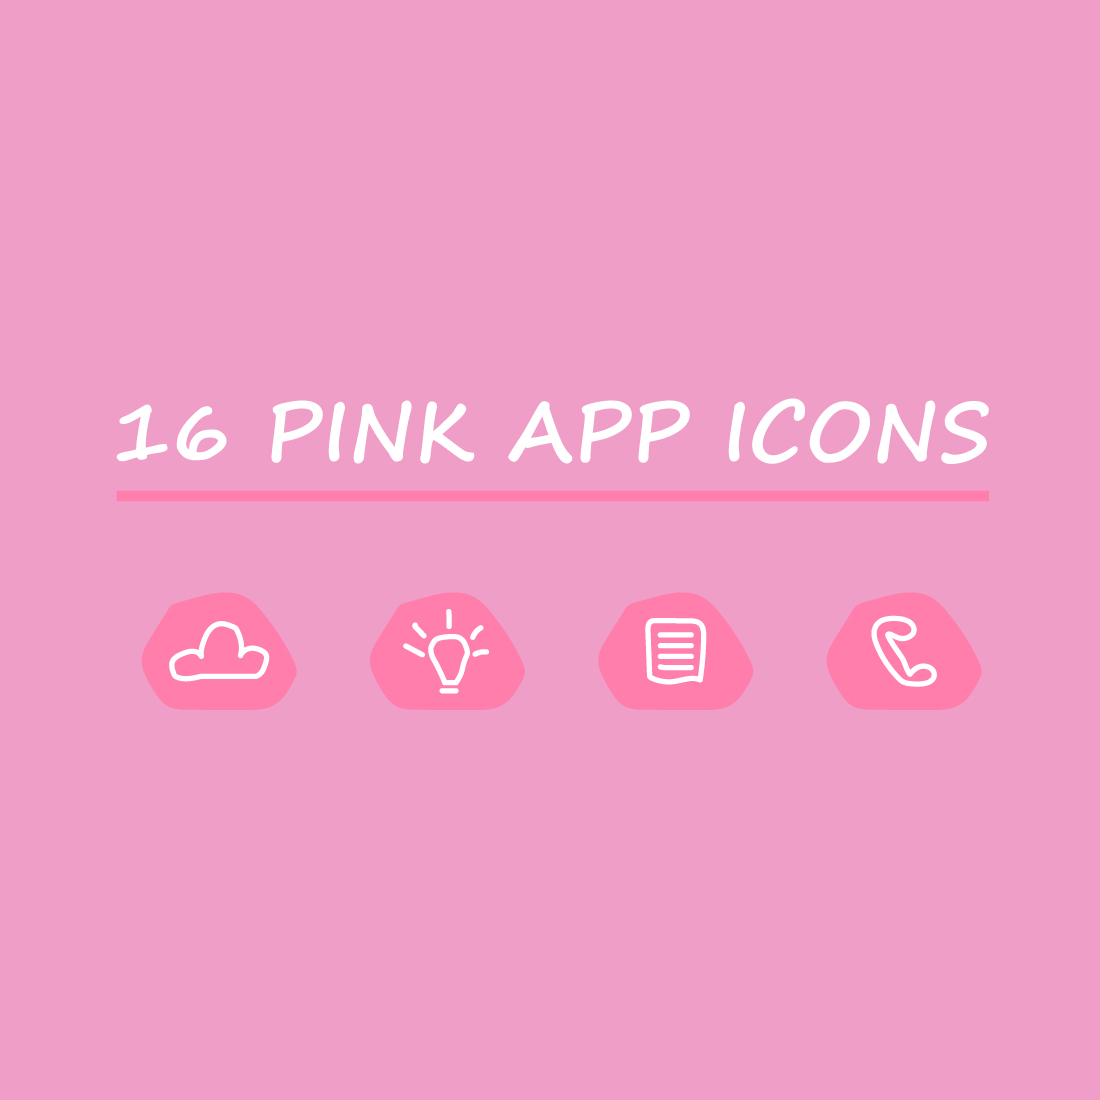 Free pink app icons main cover.